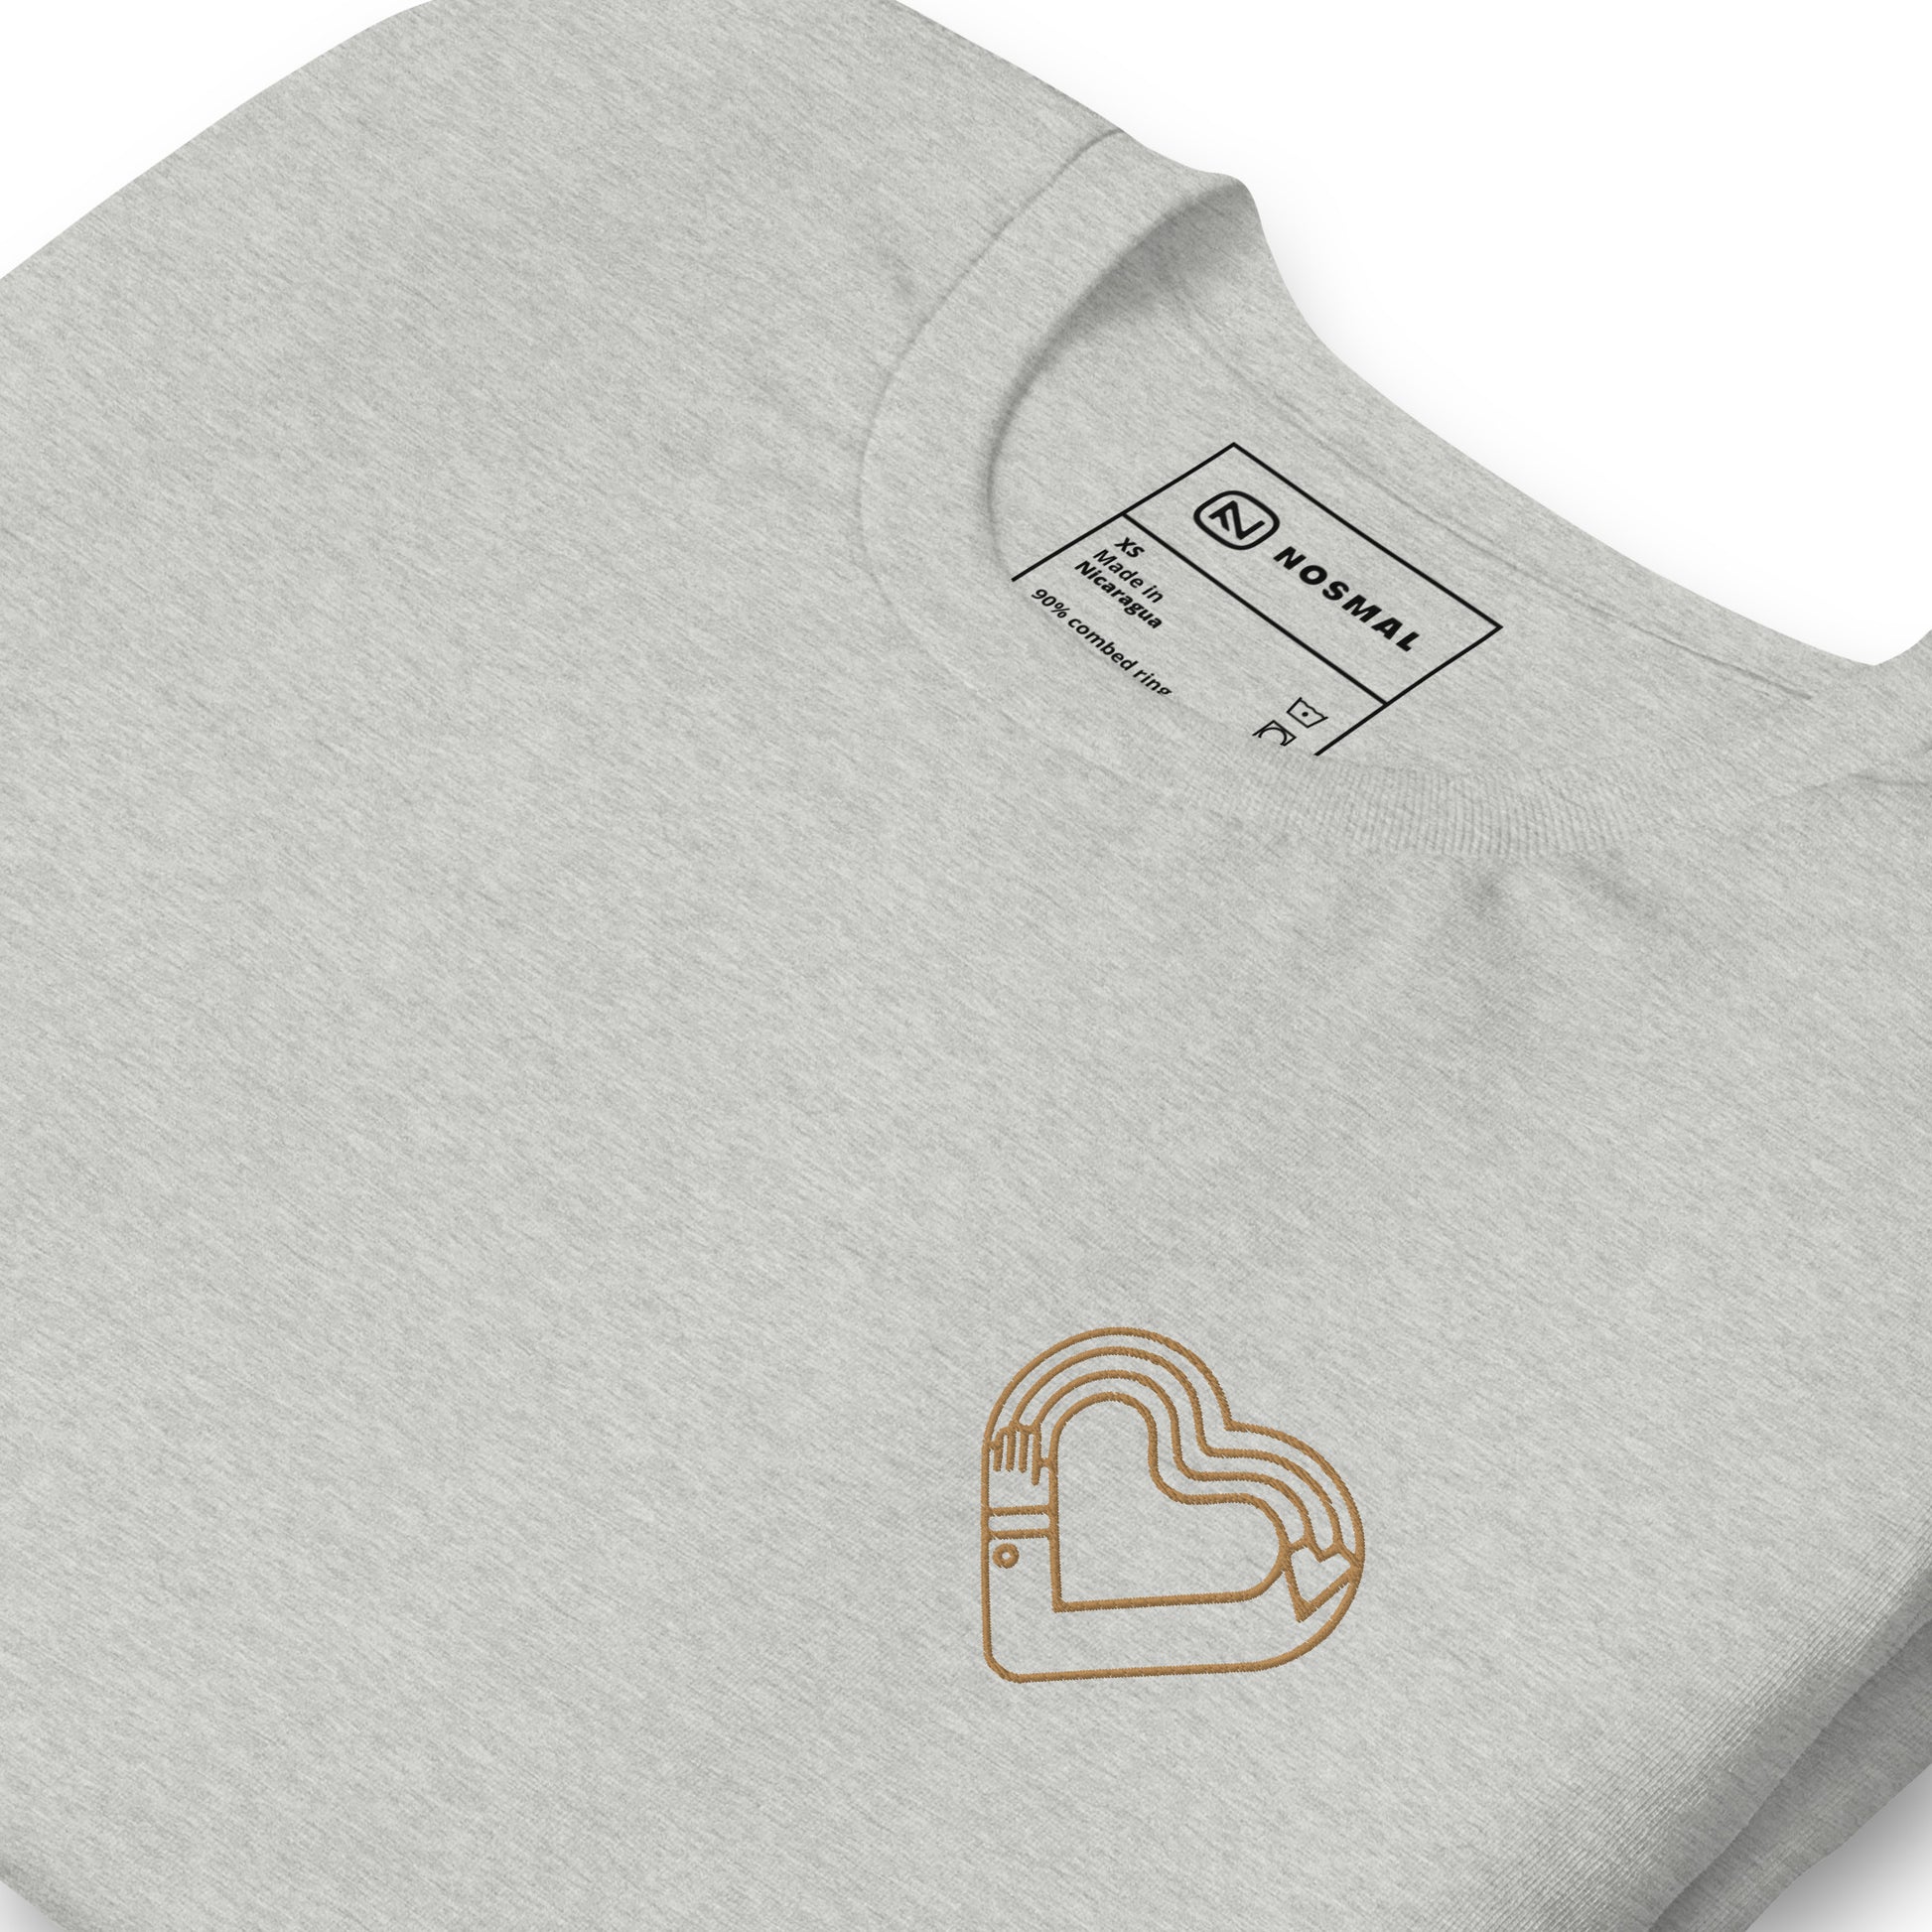 Angled close up maker's heart II gold embroidered design on heather athletic grey unisex t-shirt.